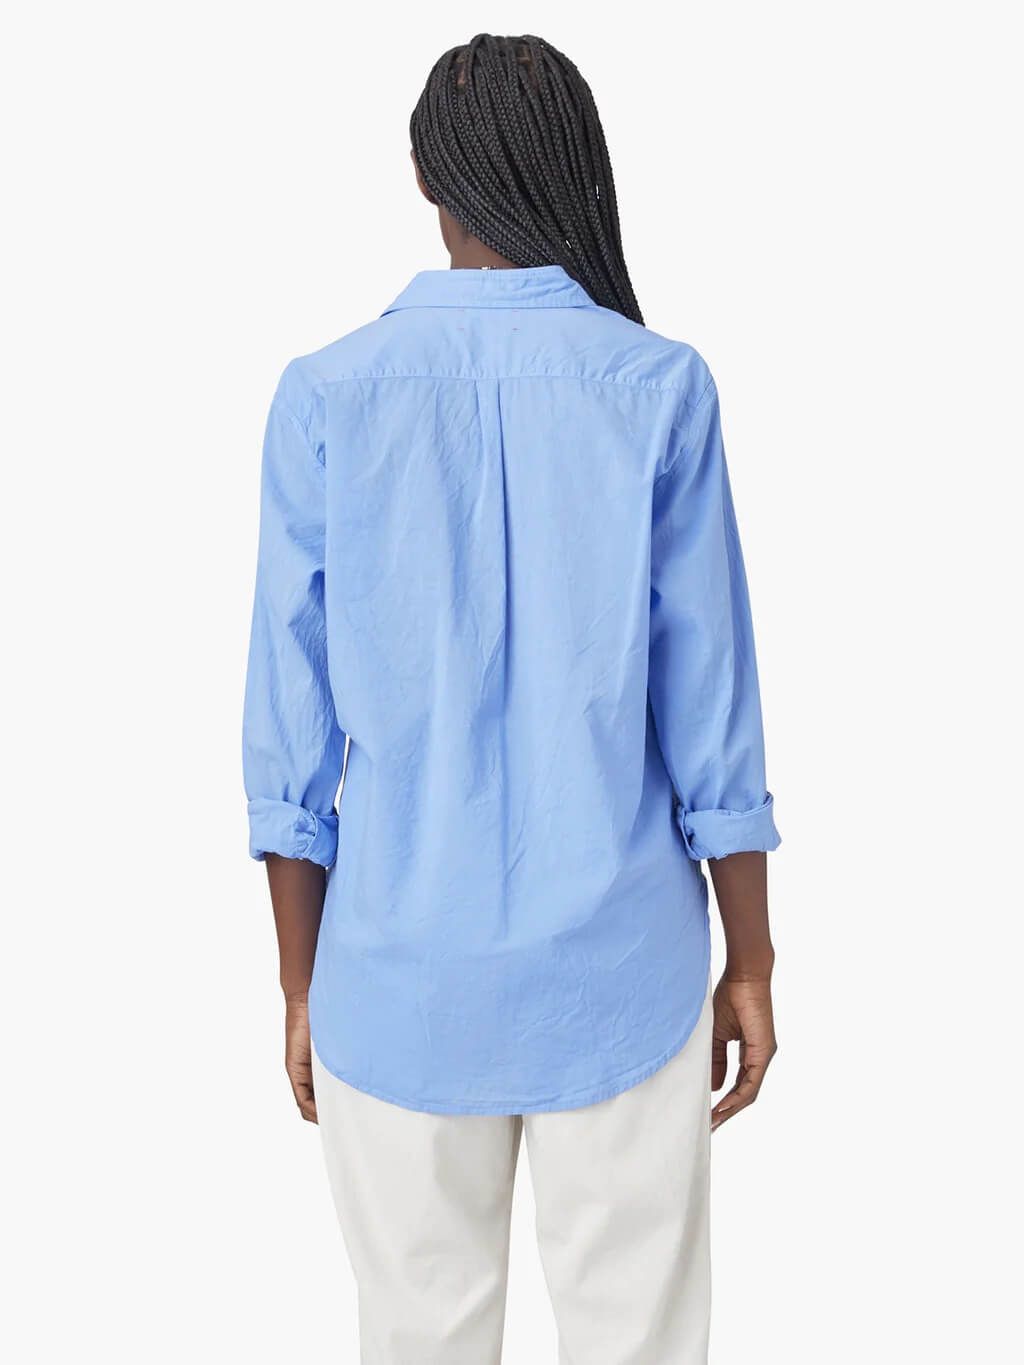 Xirena Beau Oversized Shirt in All Blue from The New Trend